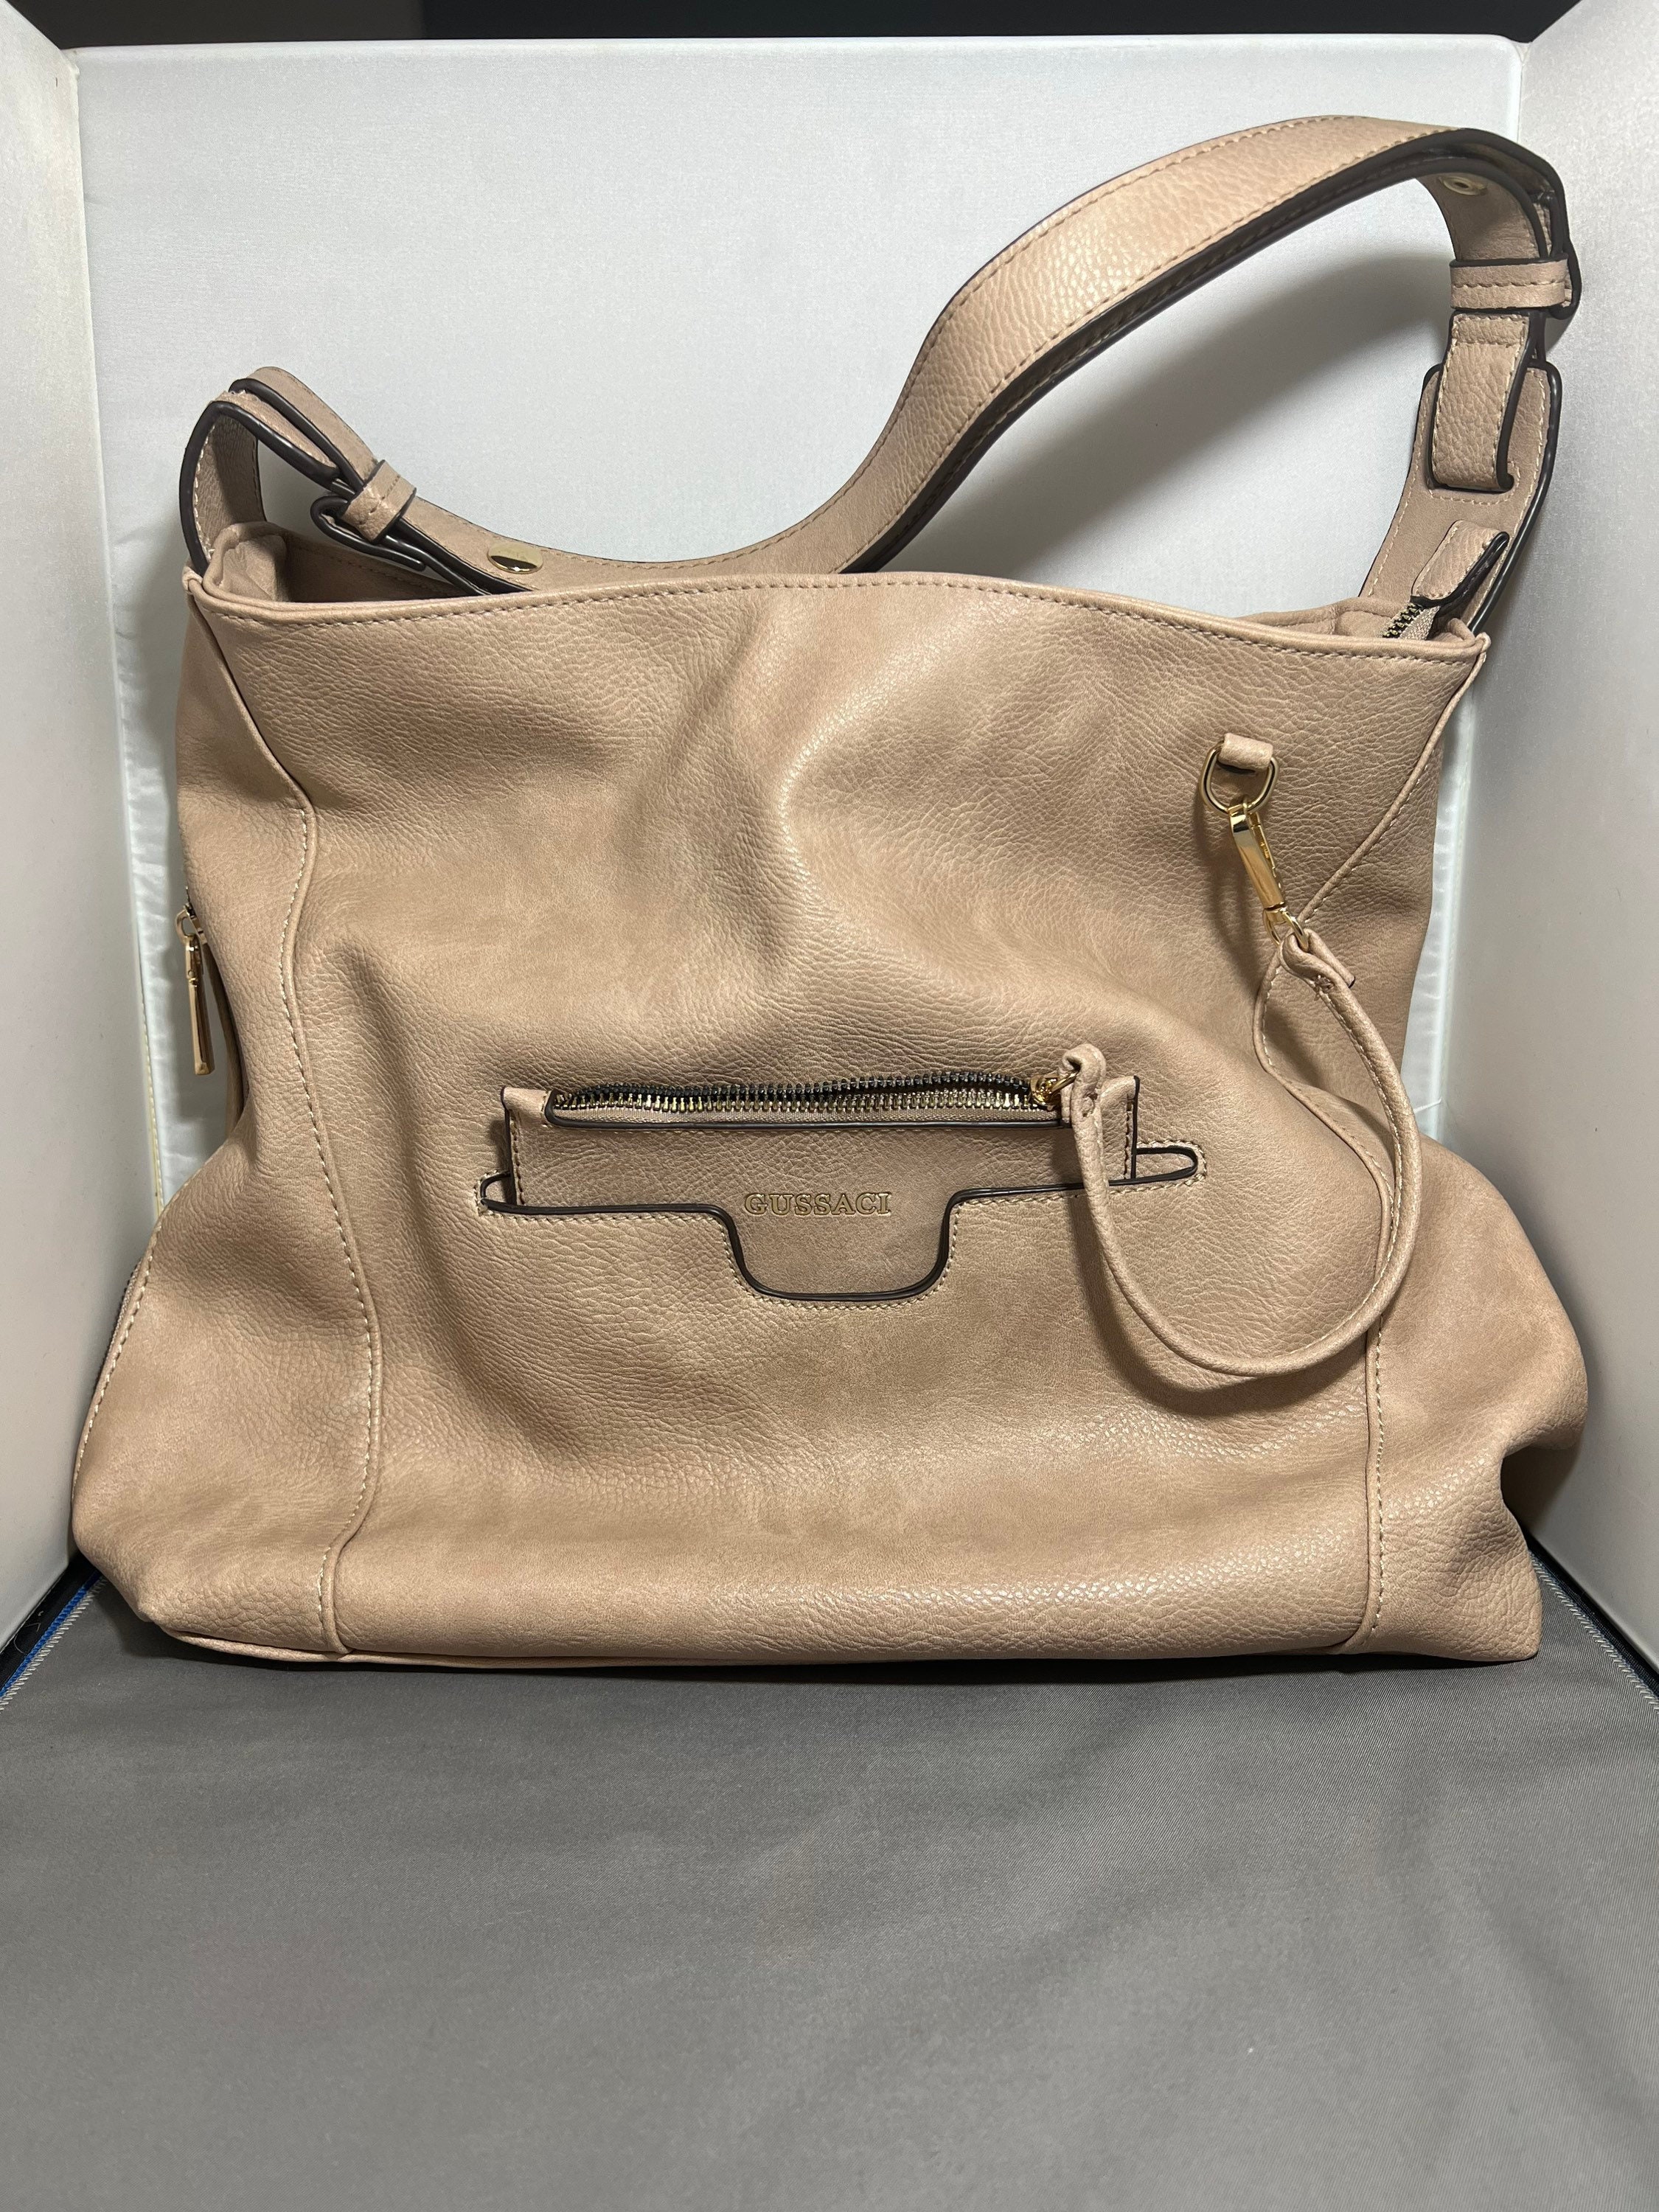 Marni bag repair project, Broken Bag With Good Quality Chain And Suede Bag..